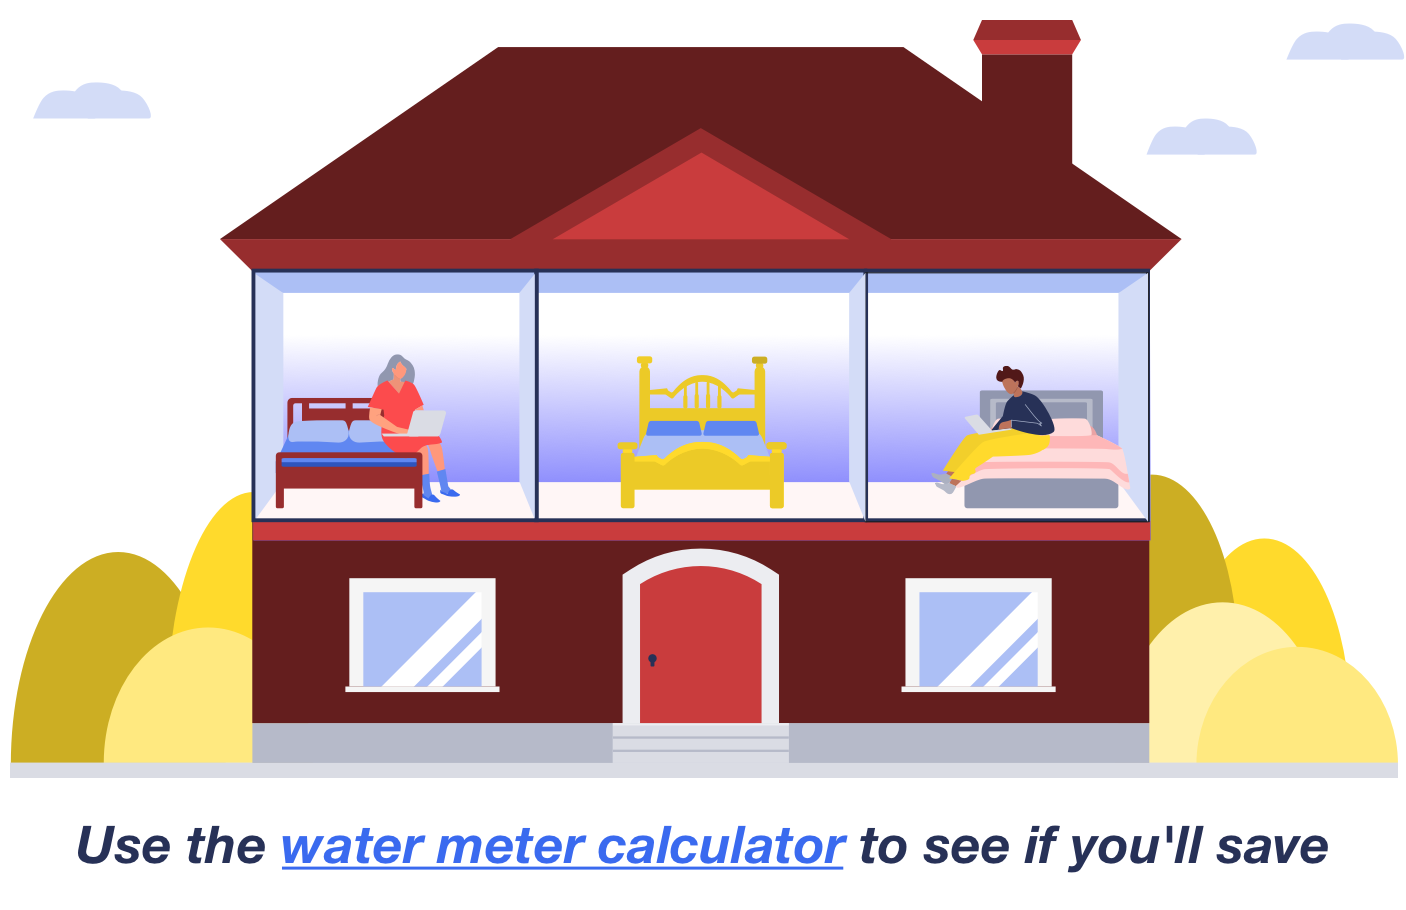 Use the water meter calculator to see if you'll save. Find one in our Cut your water bills guide.